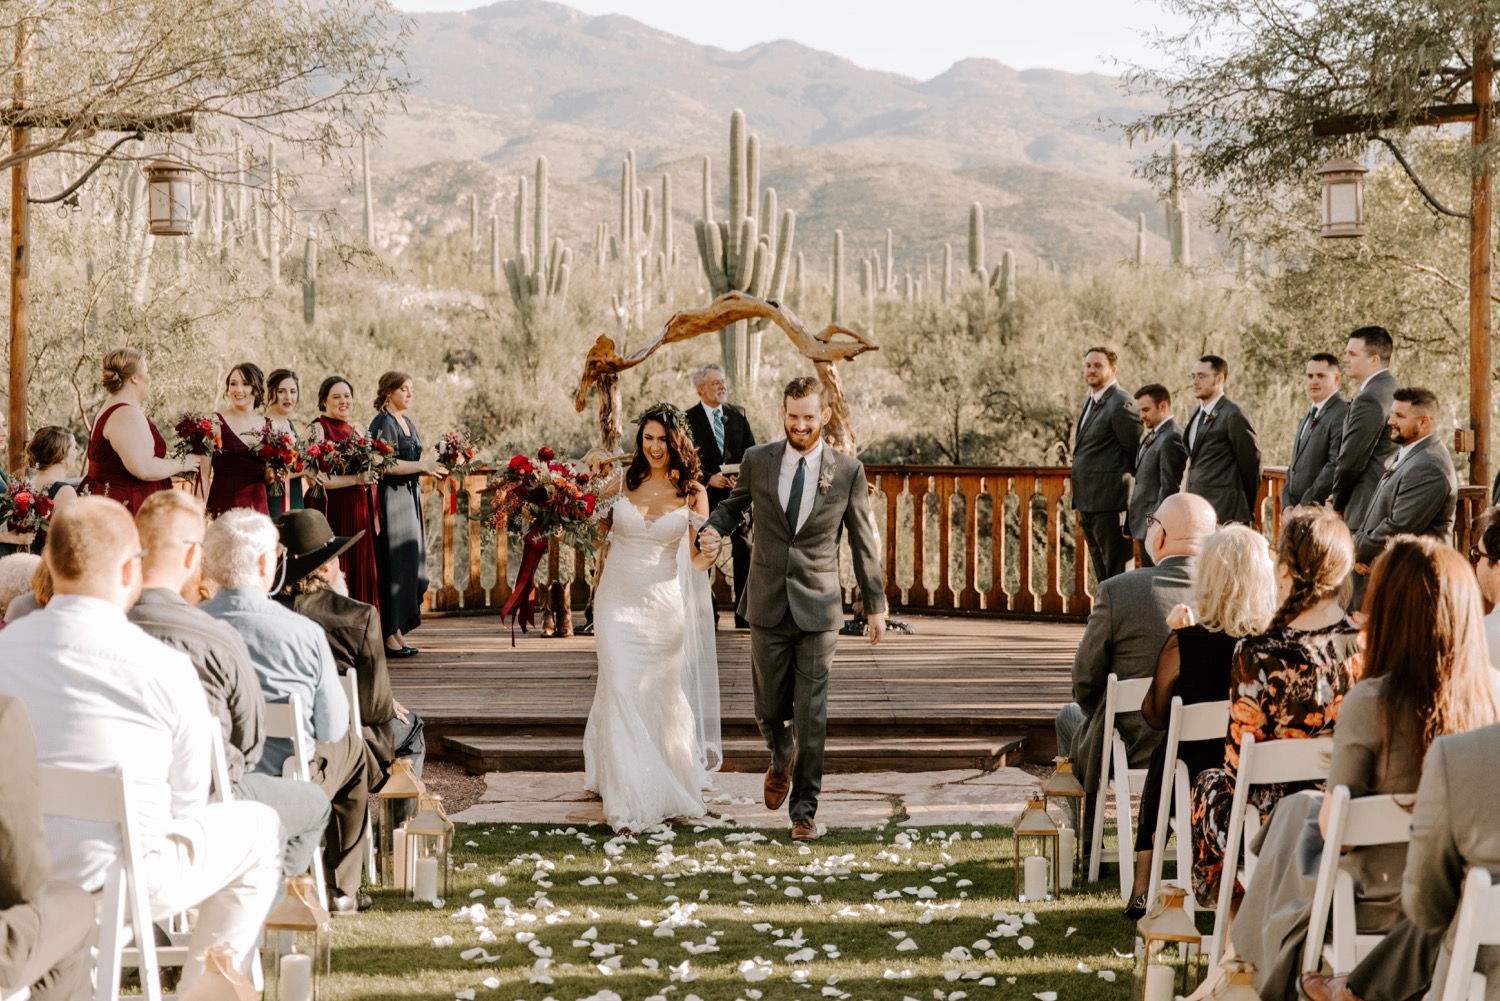 Bride and groom celebrating after their wedding ceremony at Tanque Verde Ranch with a desert cactus landscape backdrop